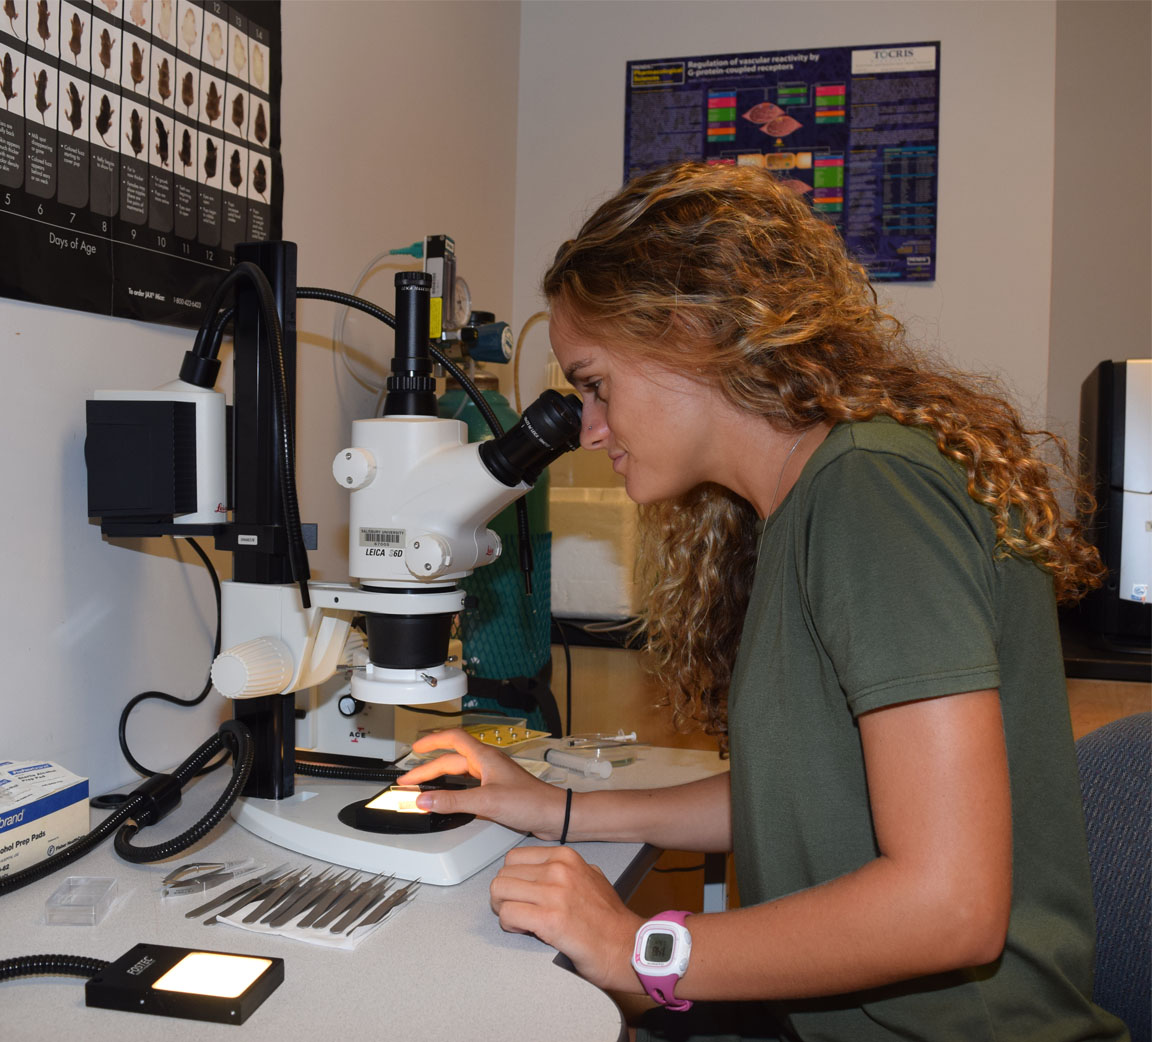 Biology student in lab viewing microscope